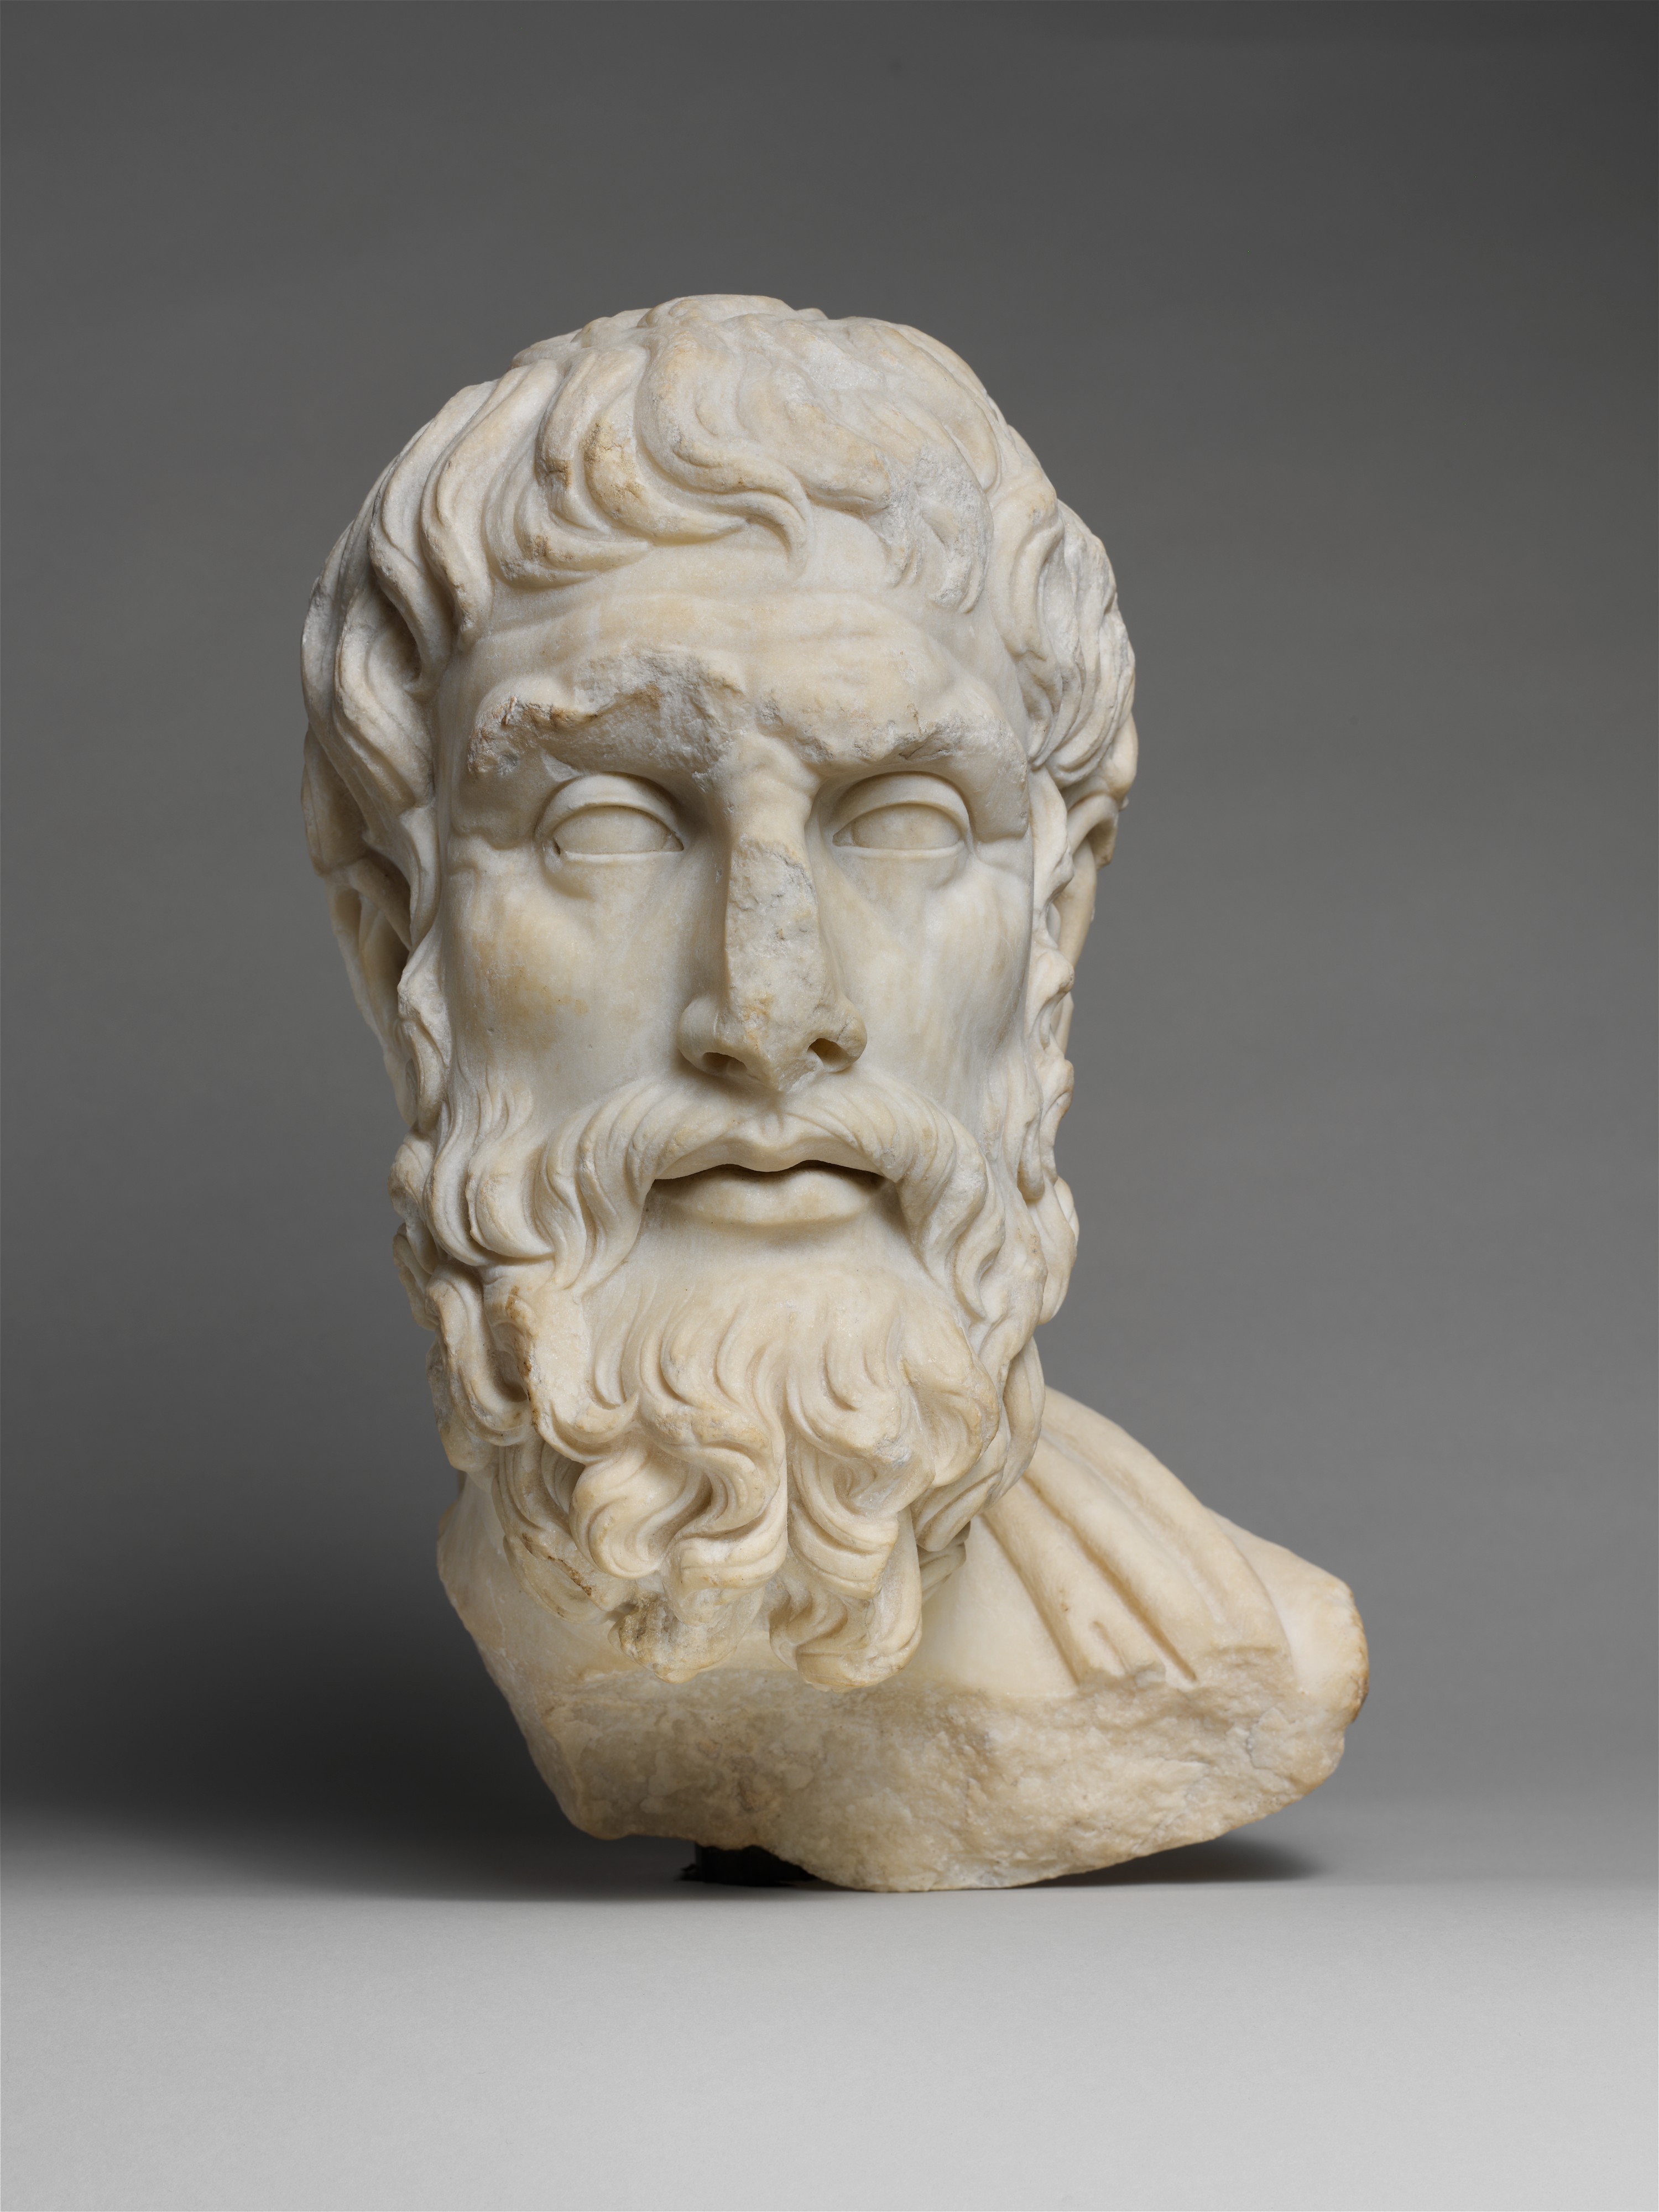 epicurus on the nature of things